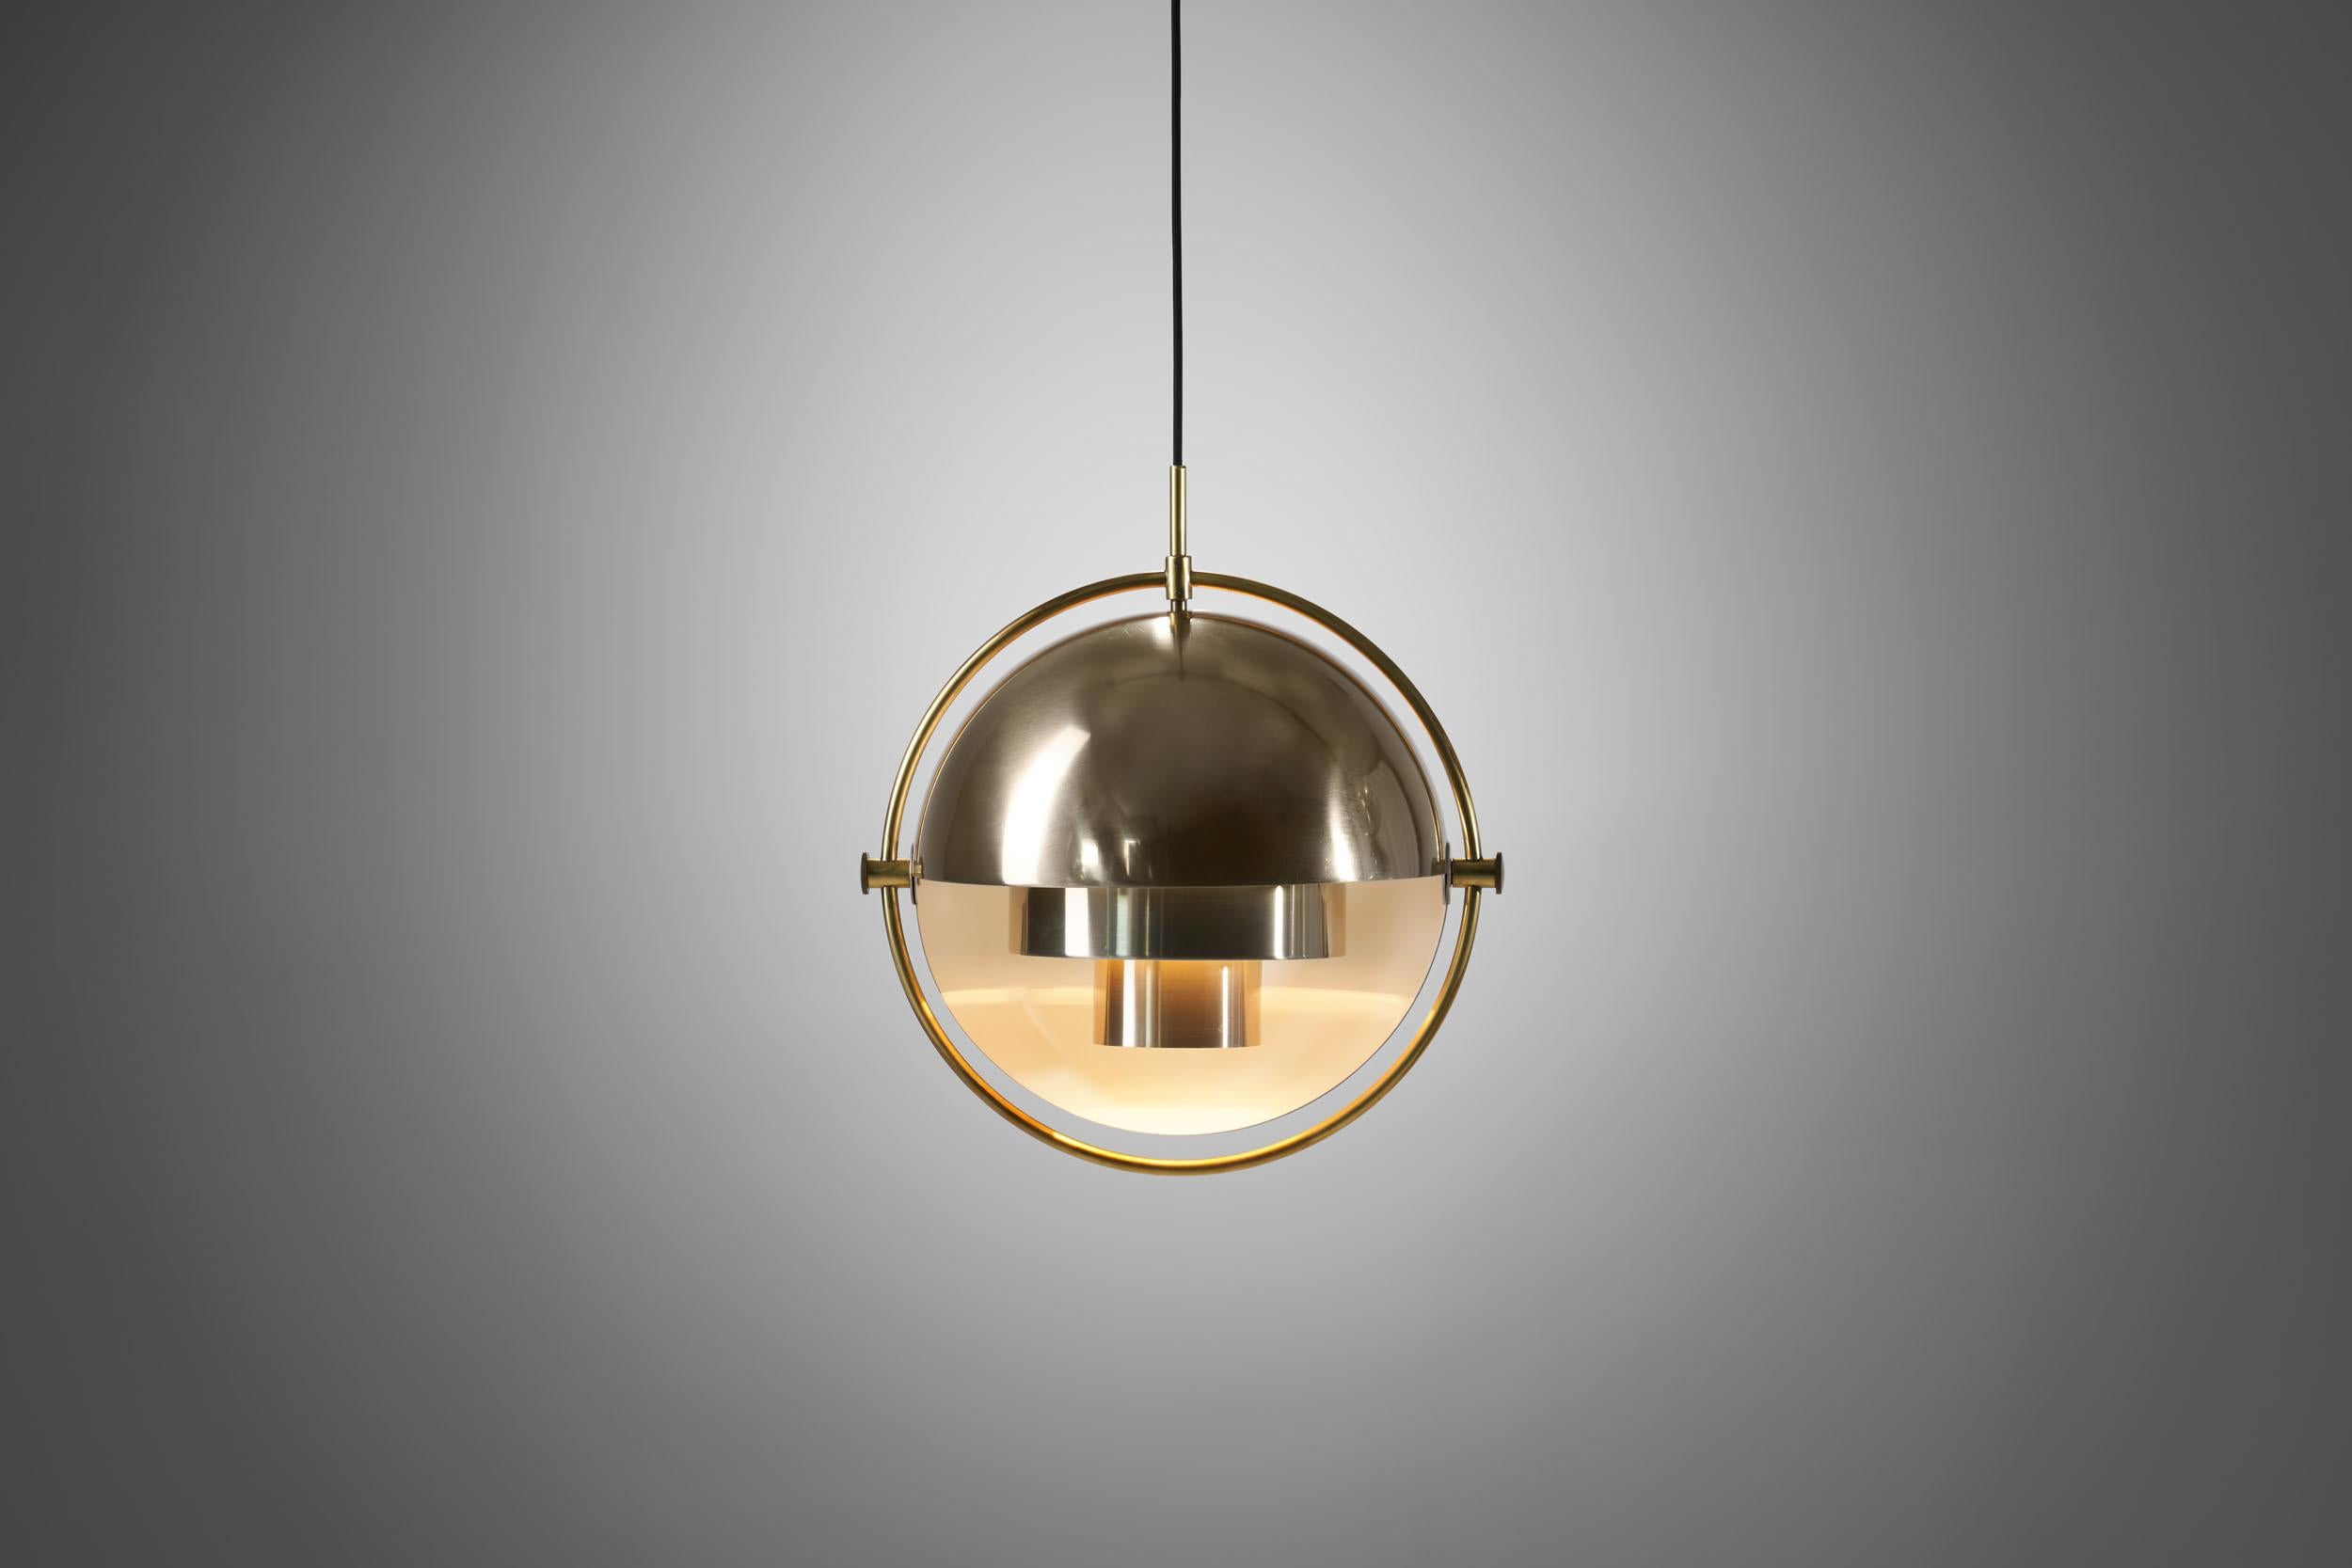 This Multi-Lite pendant was designed by Danish architect and designer Louis Weisdorf in 1972, and manufactured by the Danish lighting company Lyfa. It is one of the most recognisable Danish lighting designs.

The pendant features a sculptural,